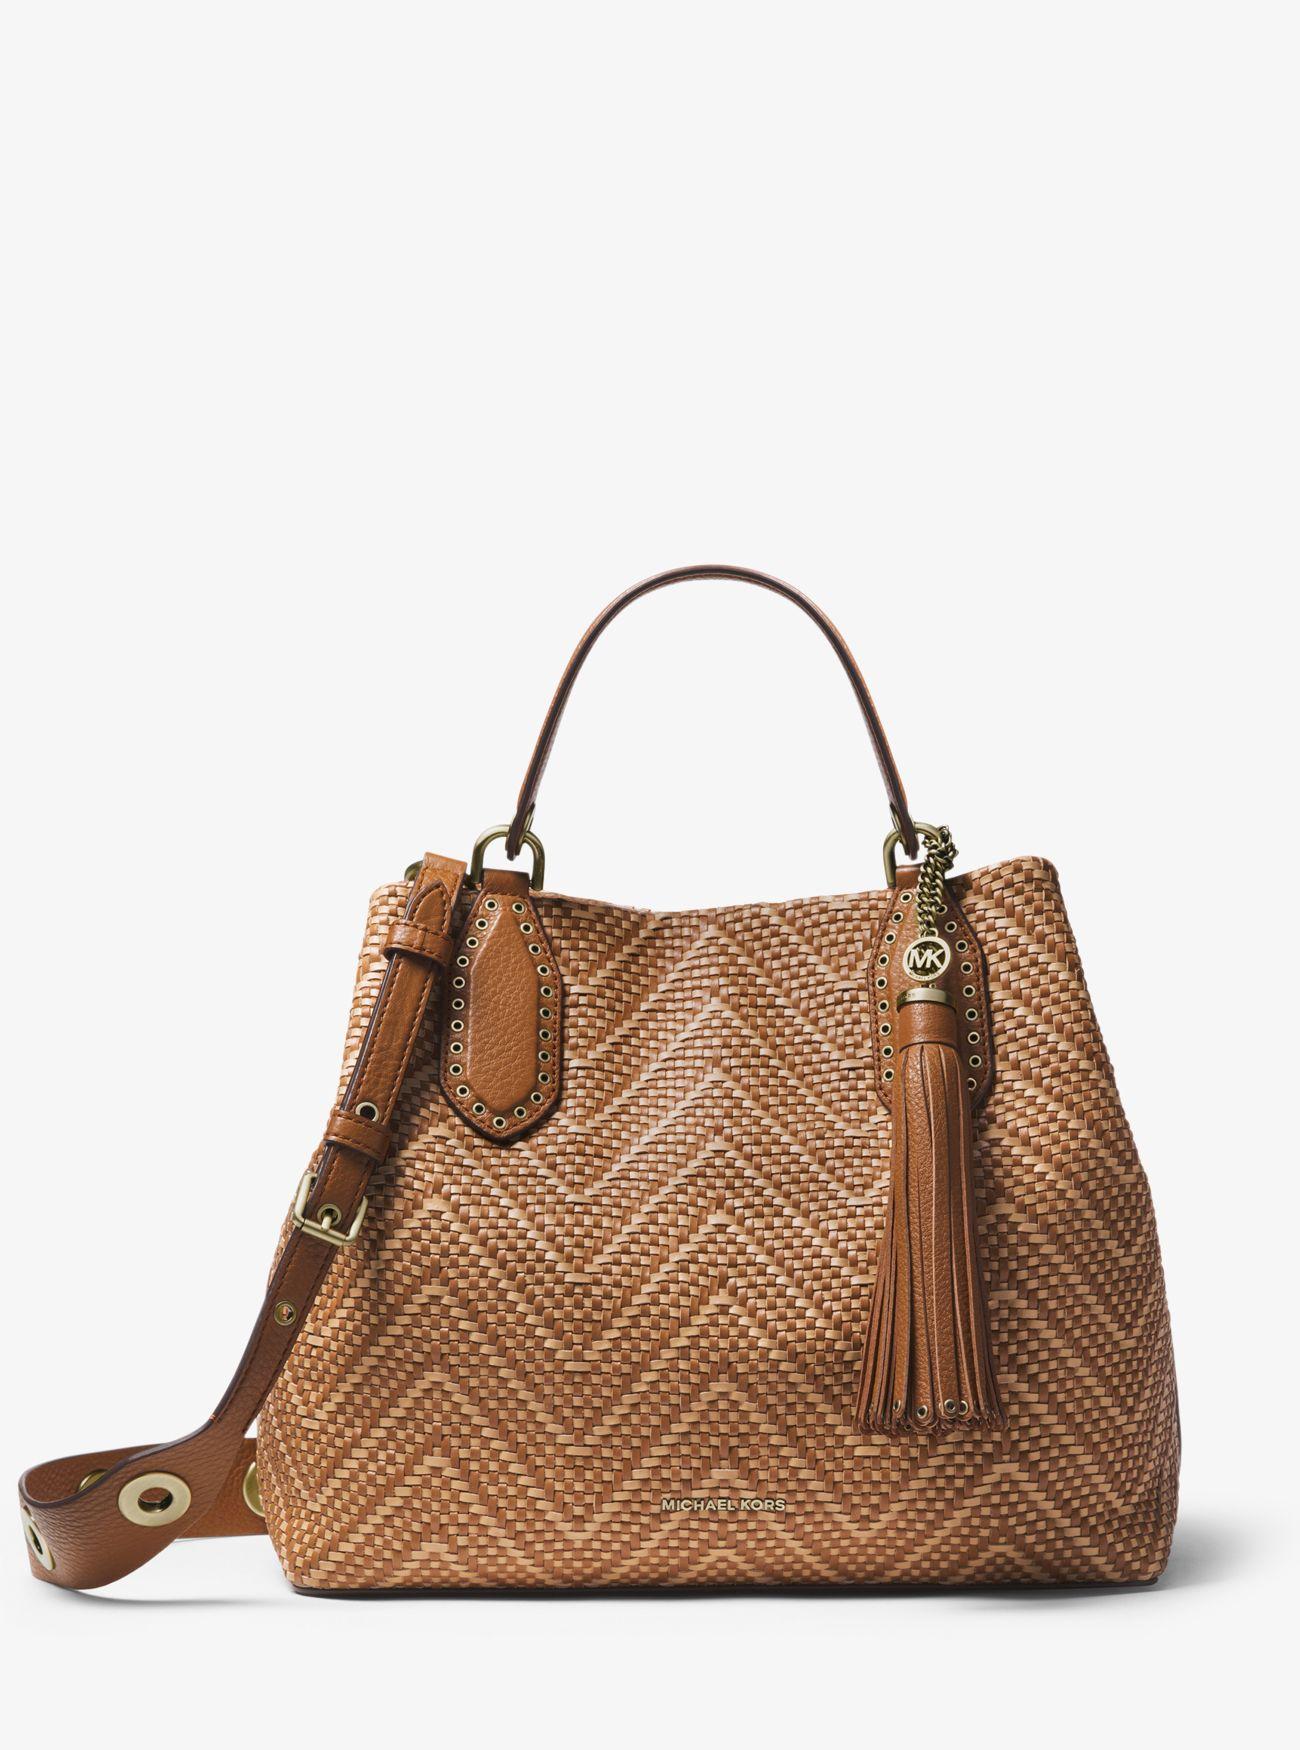 Michael Kors Brooklyn Large Woven Leather Satchel in Brown - Lyst